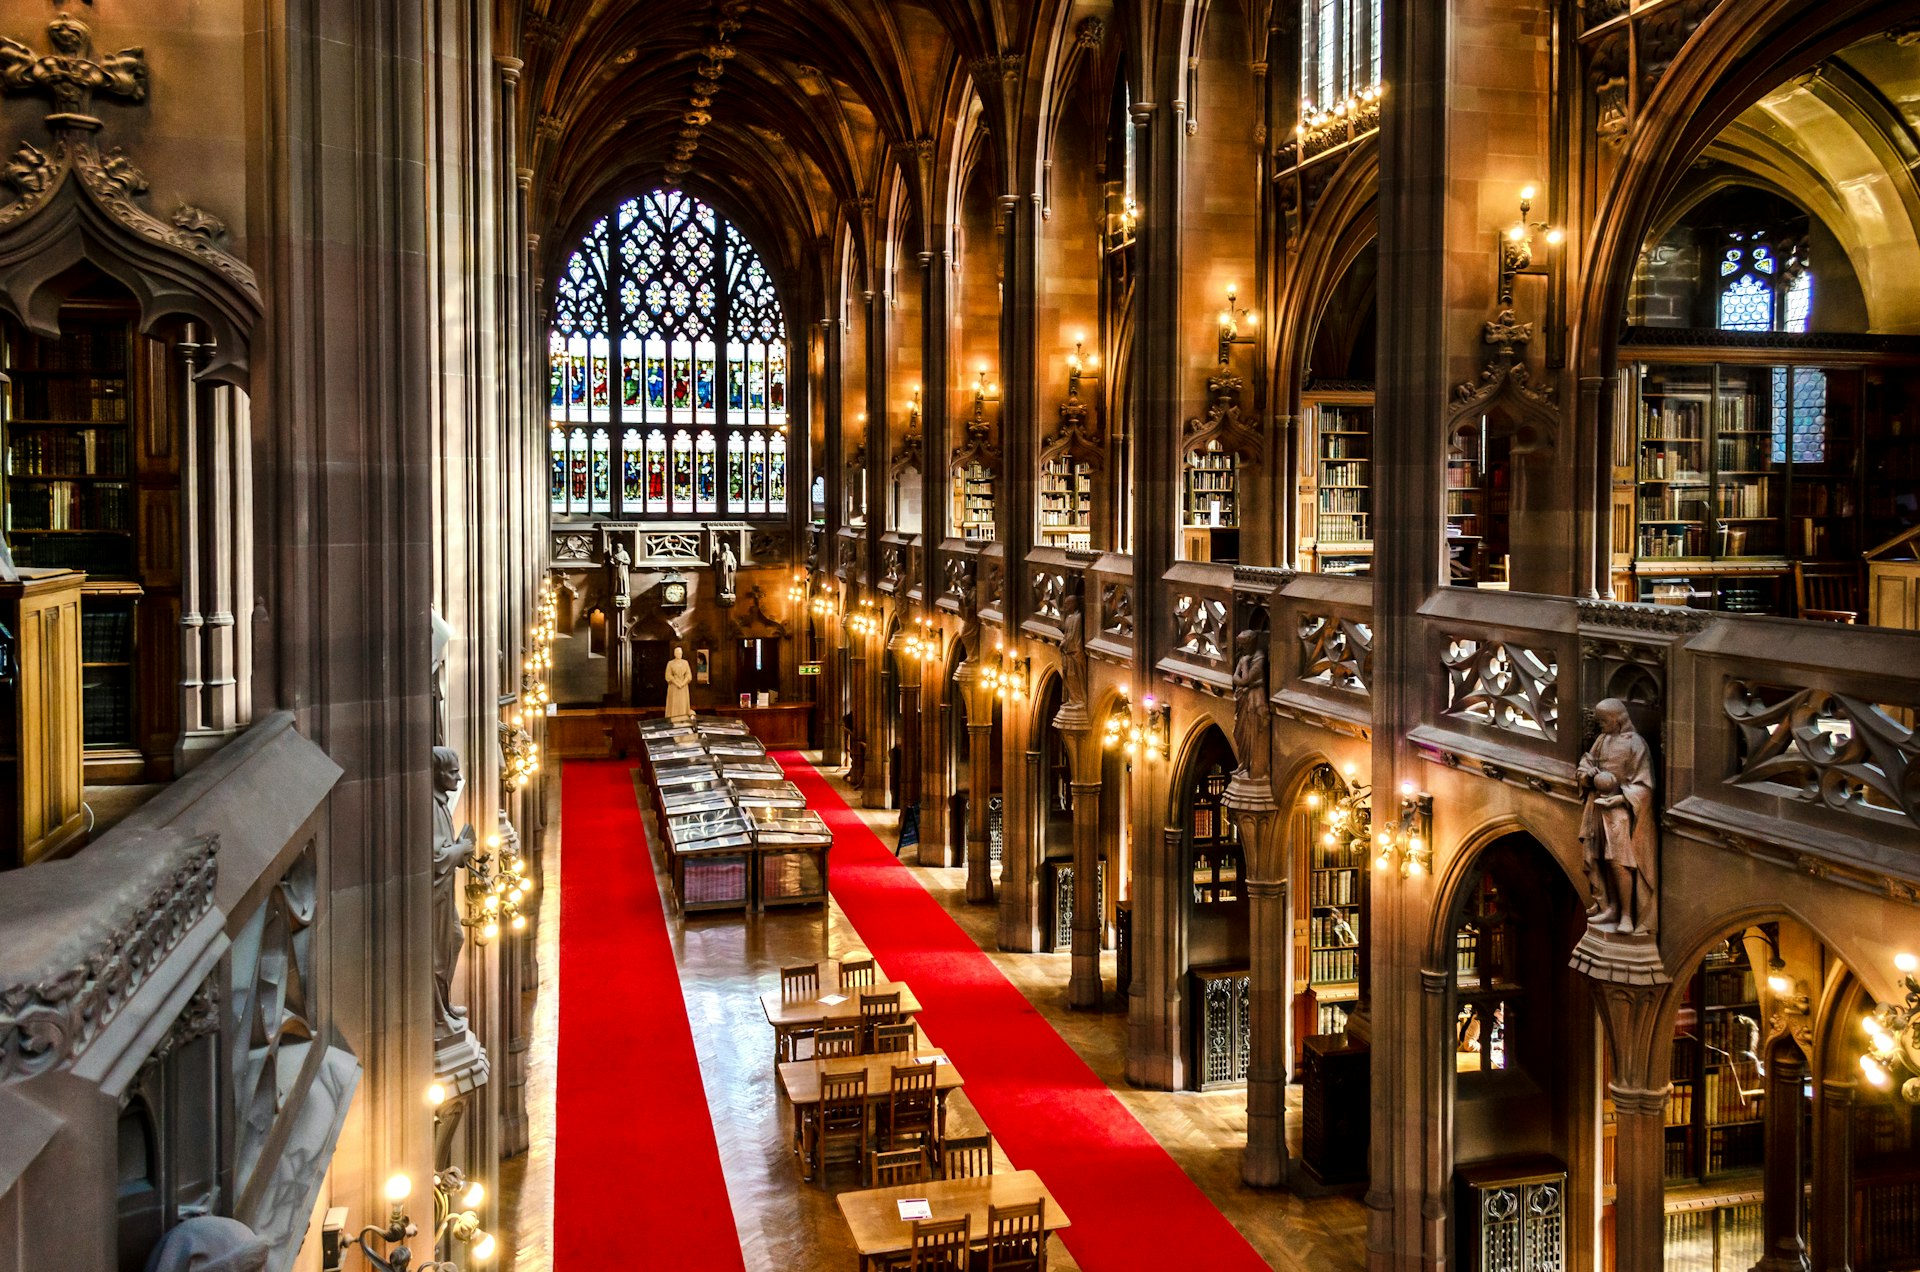 The John Rylands Library in Manchester, England